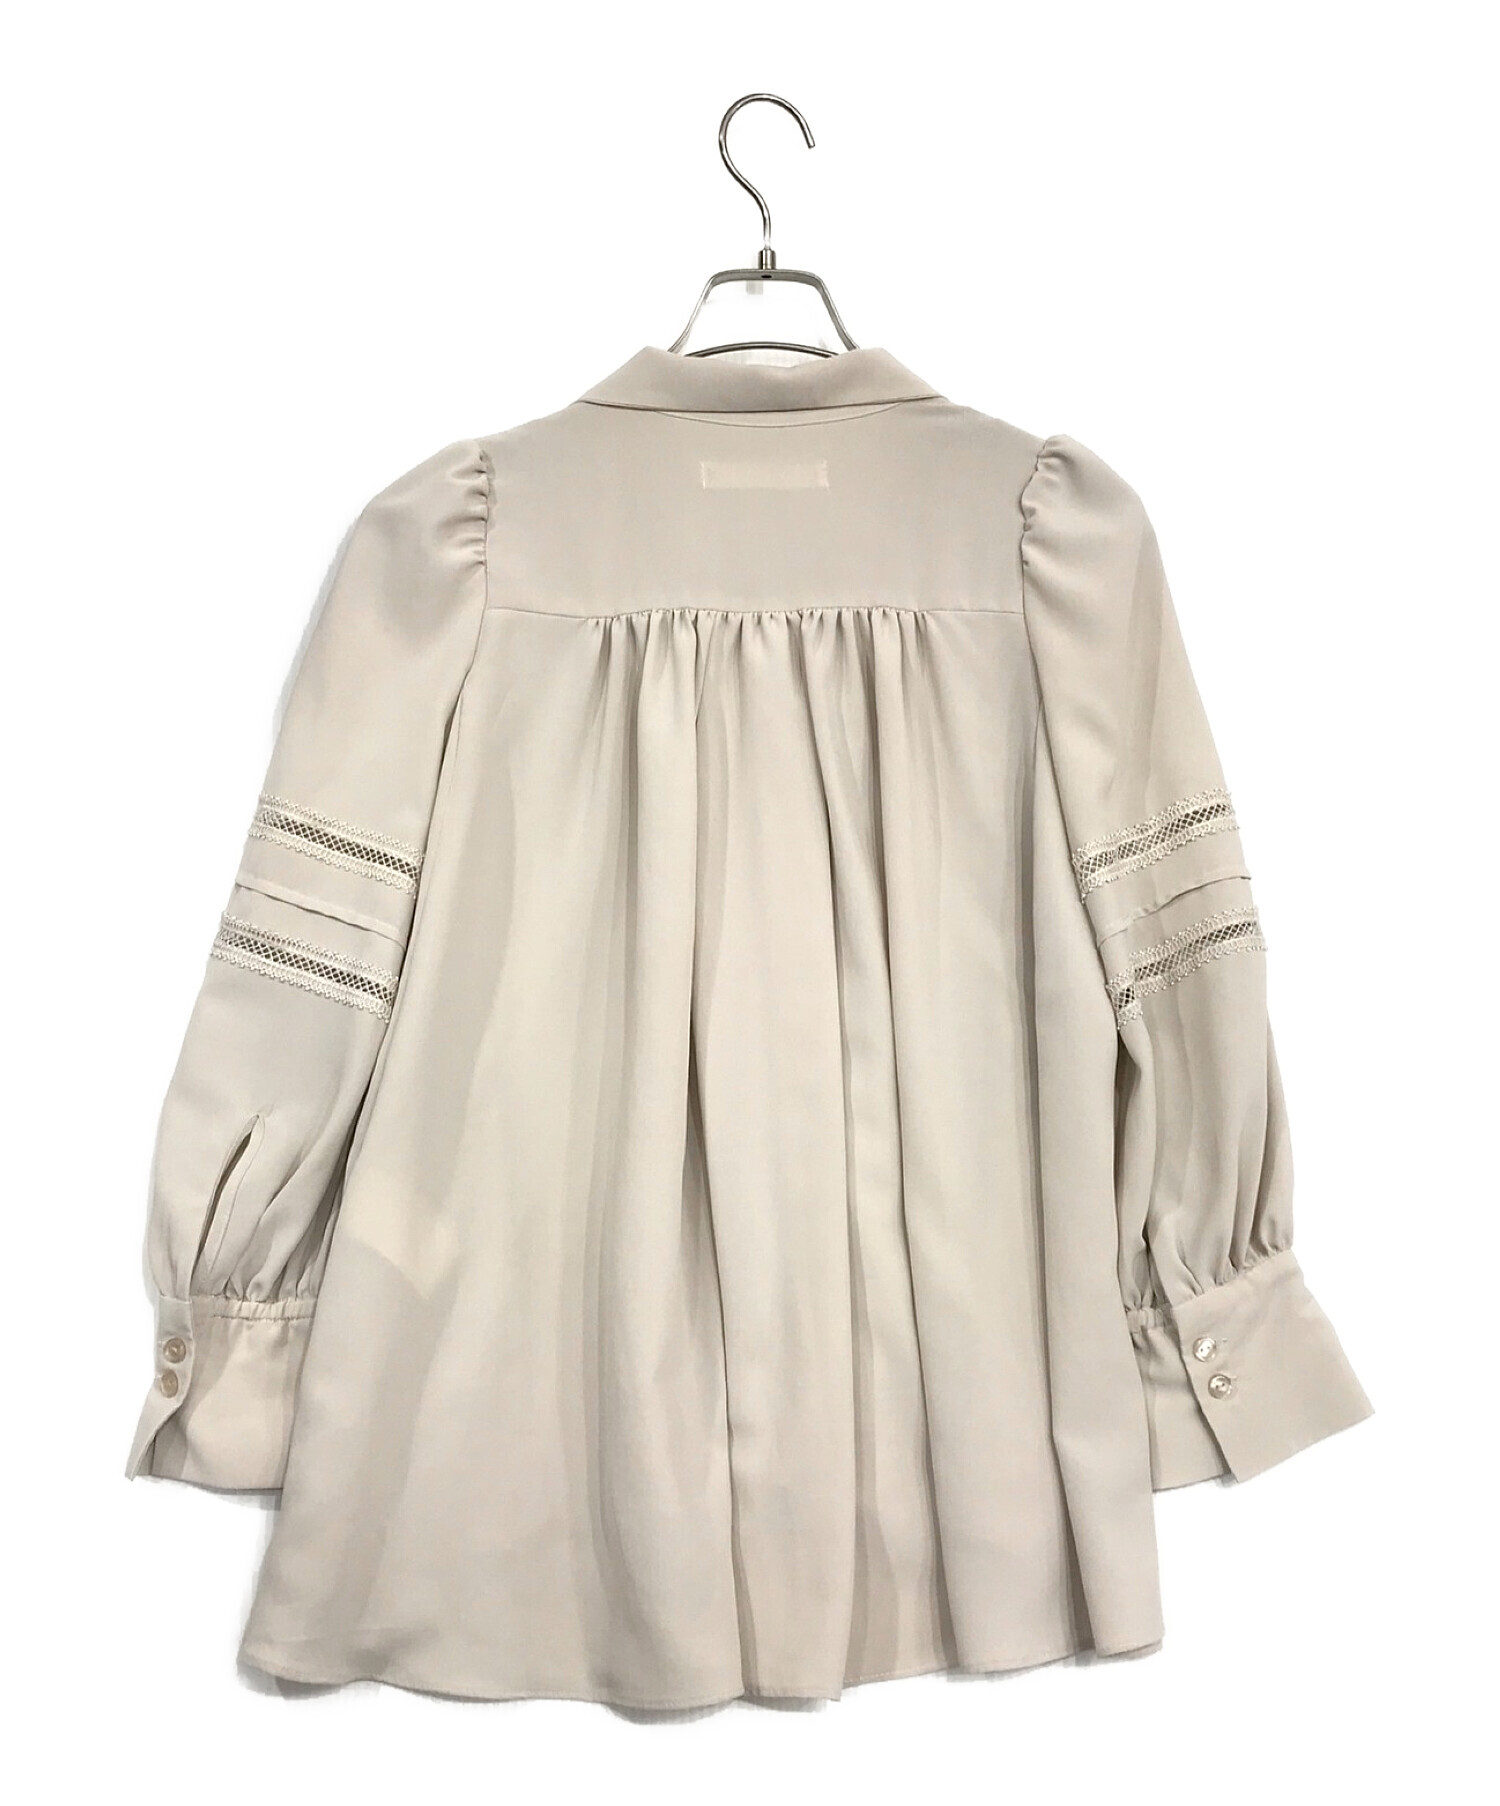 HER LIP TO (ハーリップトゥ) Lace Trimmed Bow-Tie Blouse アイボリー サイズ:SIZE　S